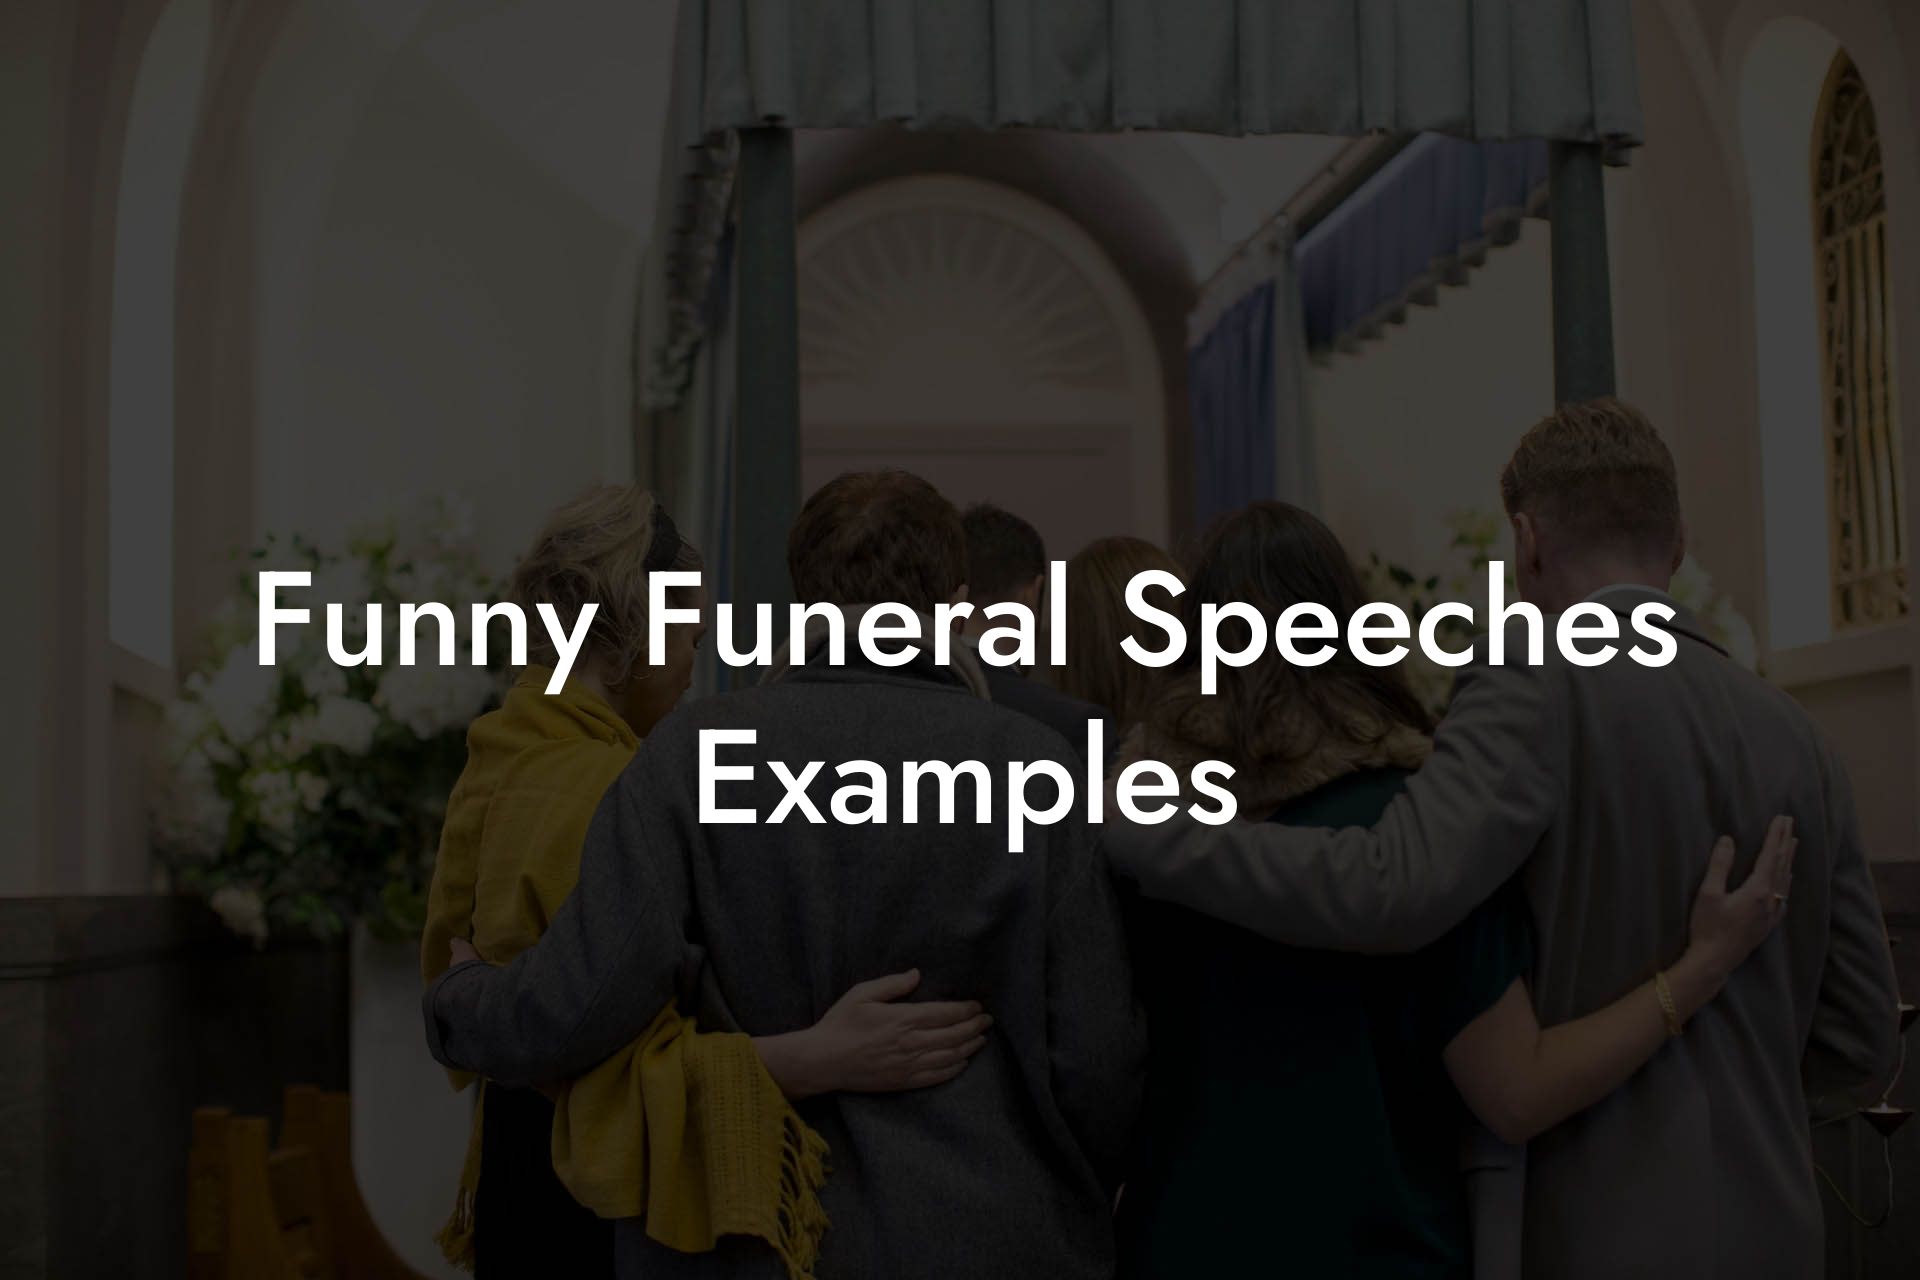 Funny Funeral Speeches Examples